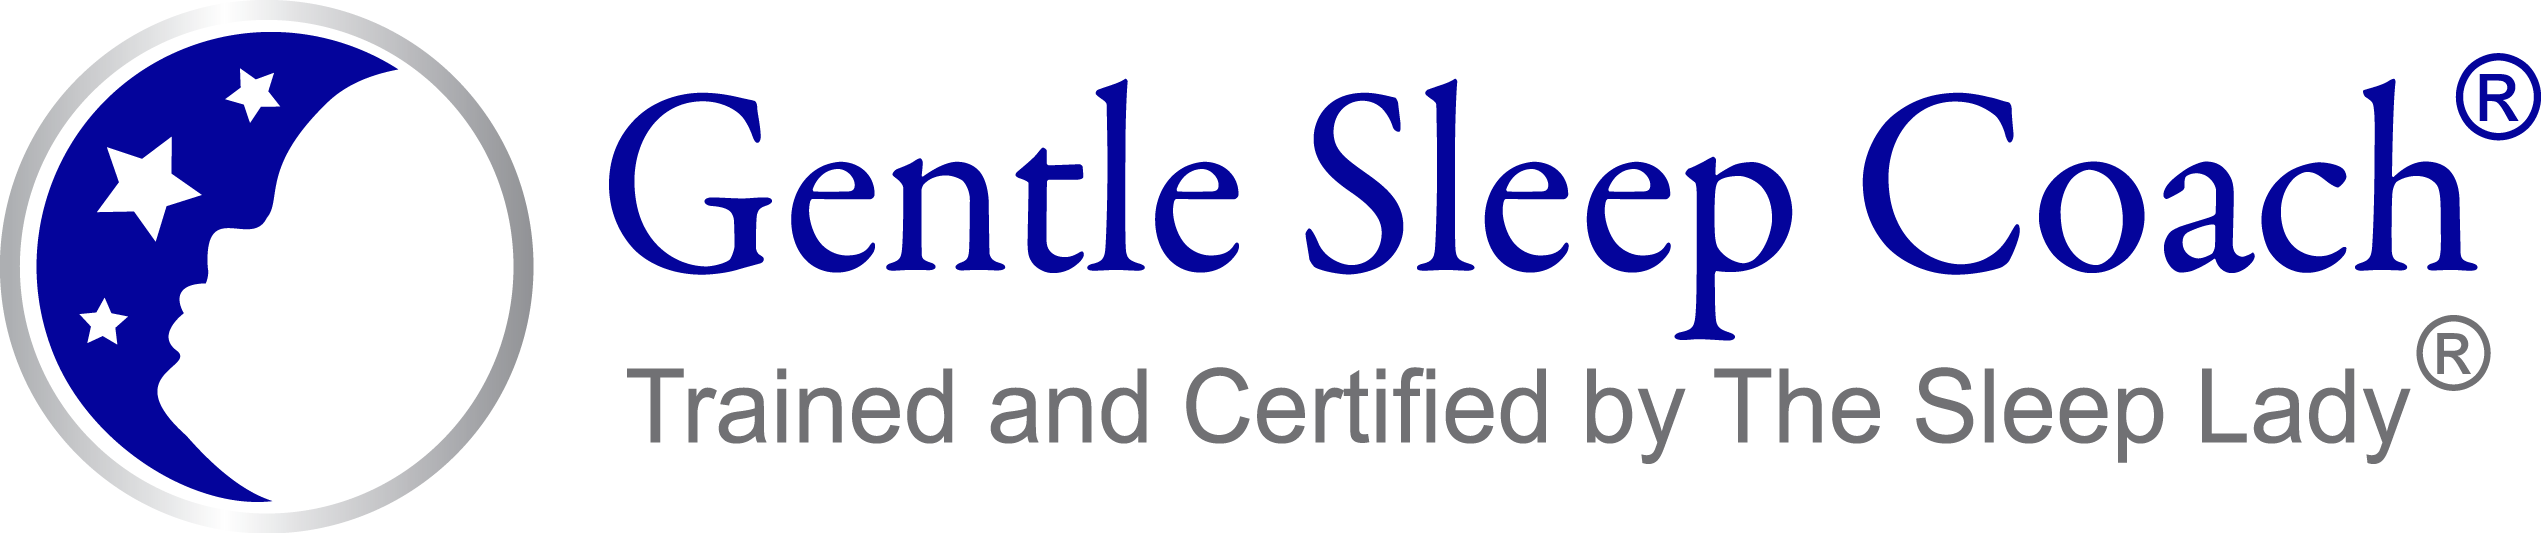 GSC logo png - How To Sleep train Your Newborn